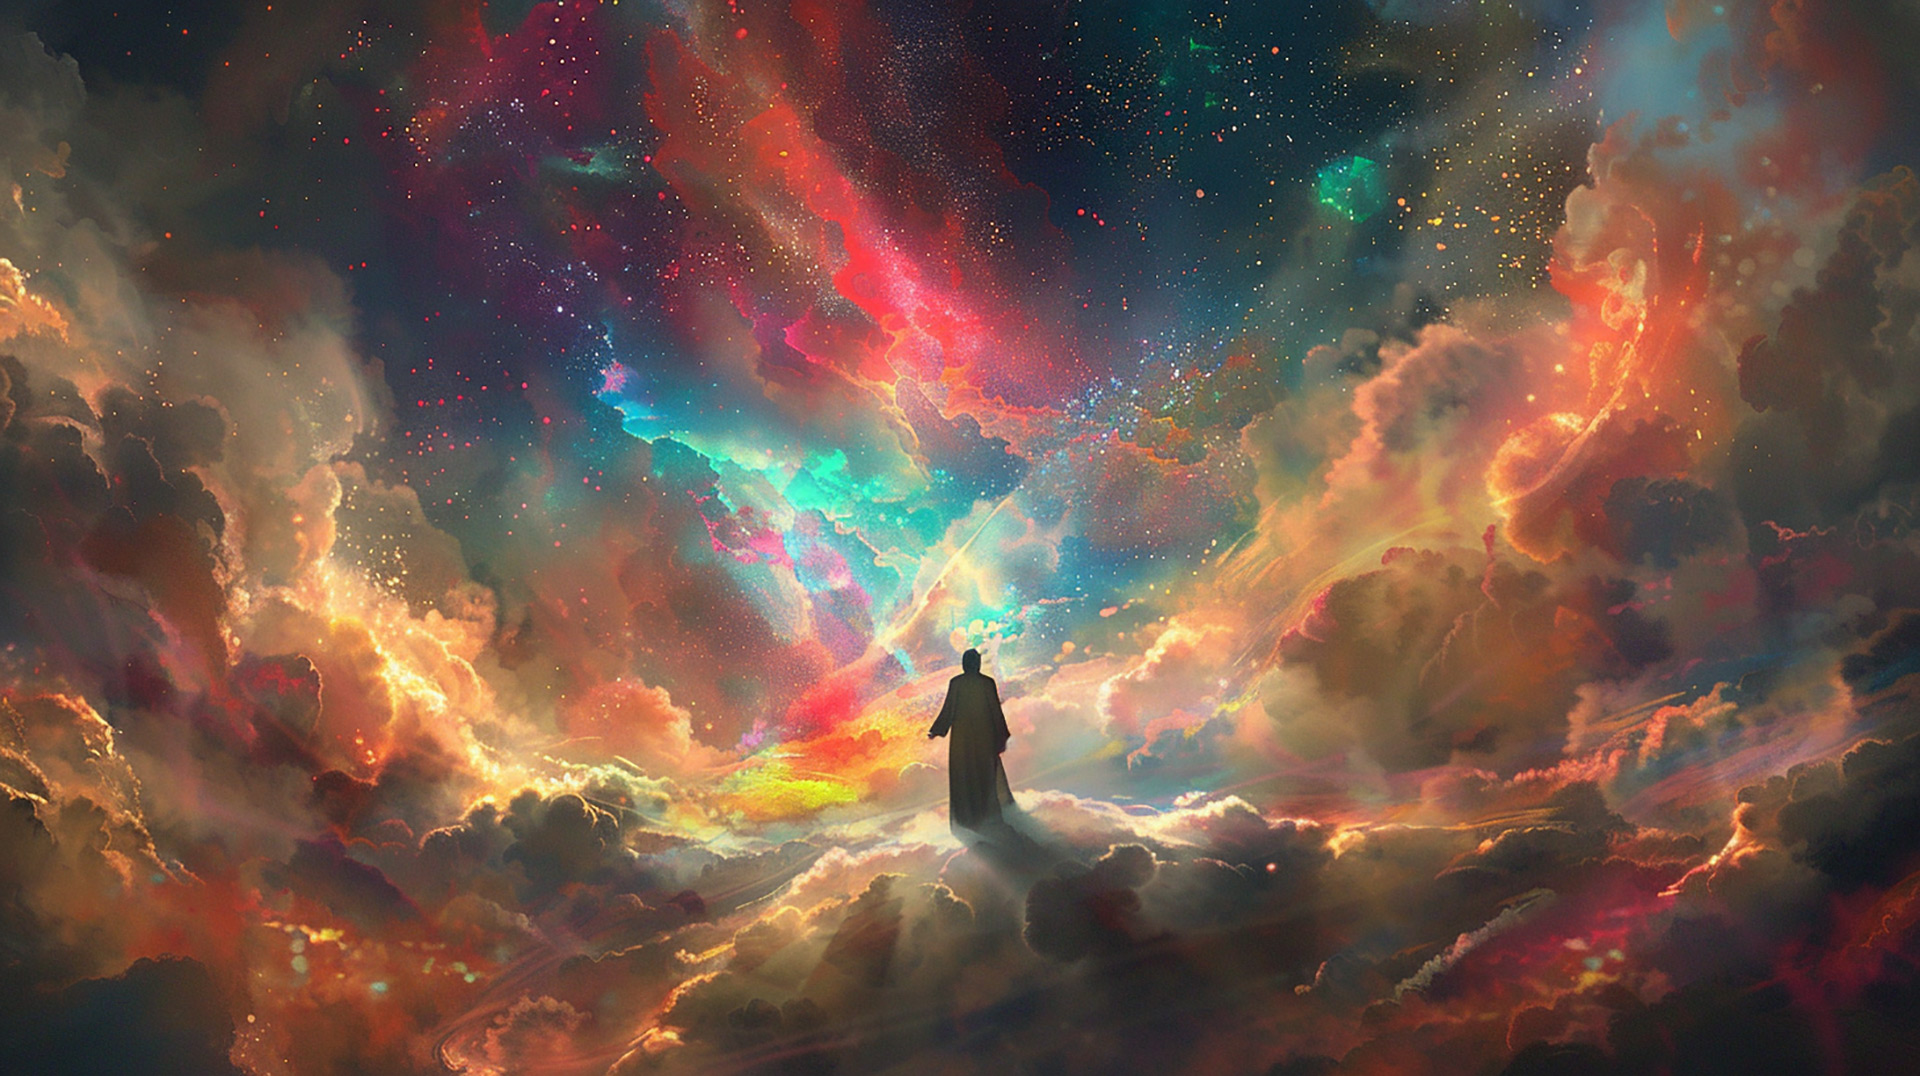 Transcendent Majesty: Wallpaper Displaying the Divine Majesty and Greatness of God